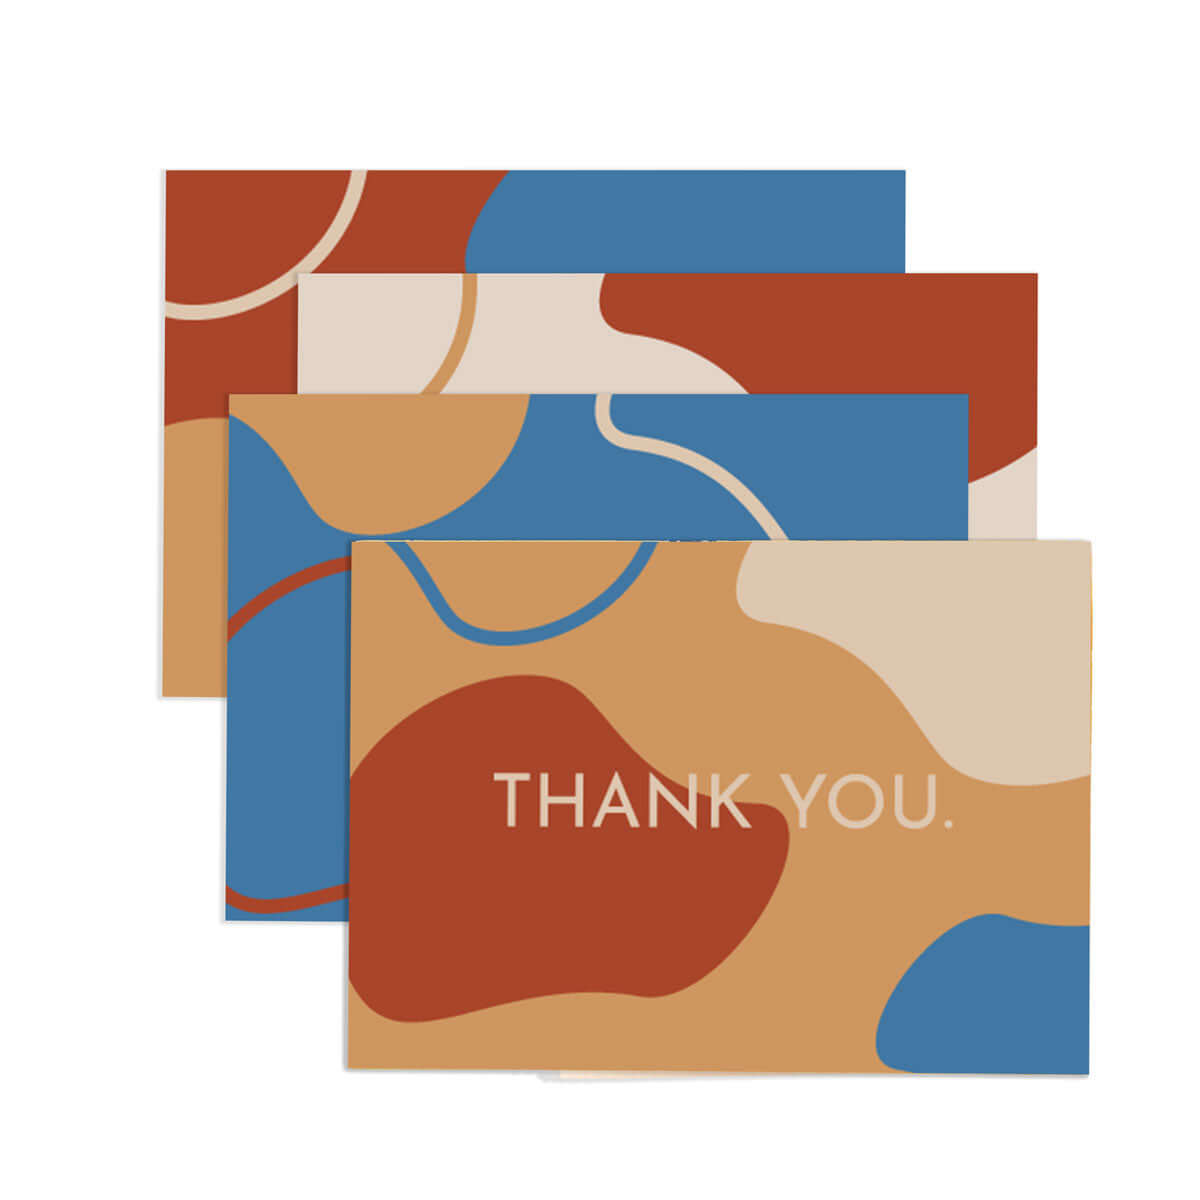 full set of 4 Retro Thank You Cards with similar varying abstract illustrations with white text that says thank you